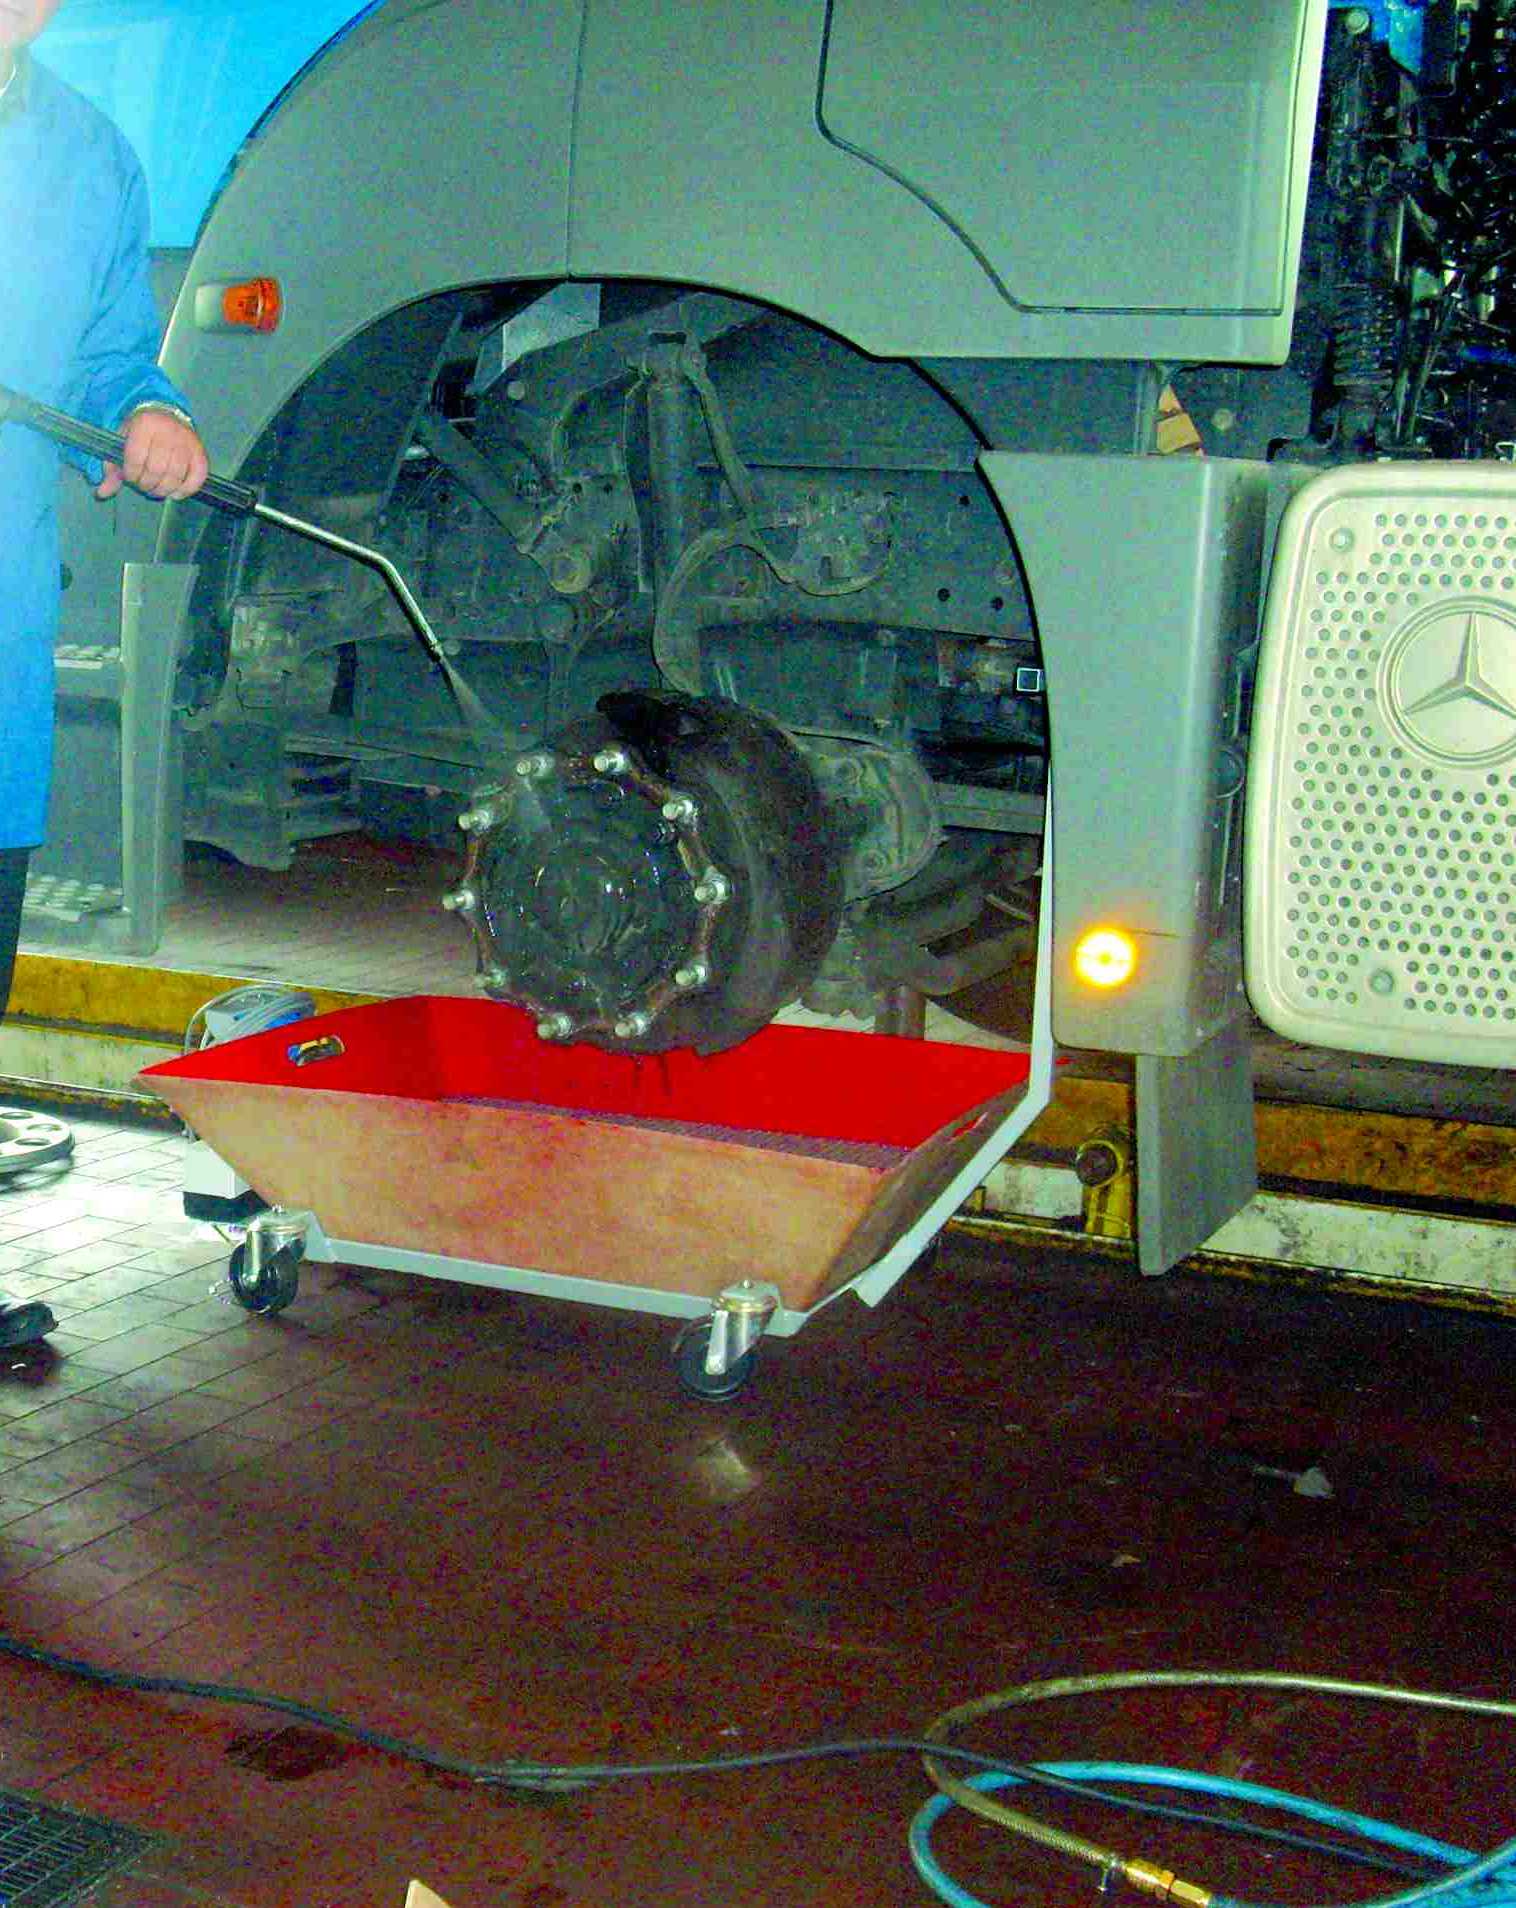 Cleaning truck brakes at the pit, with water collector for dirt water